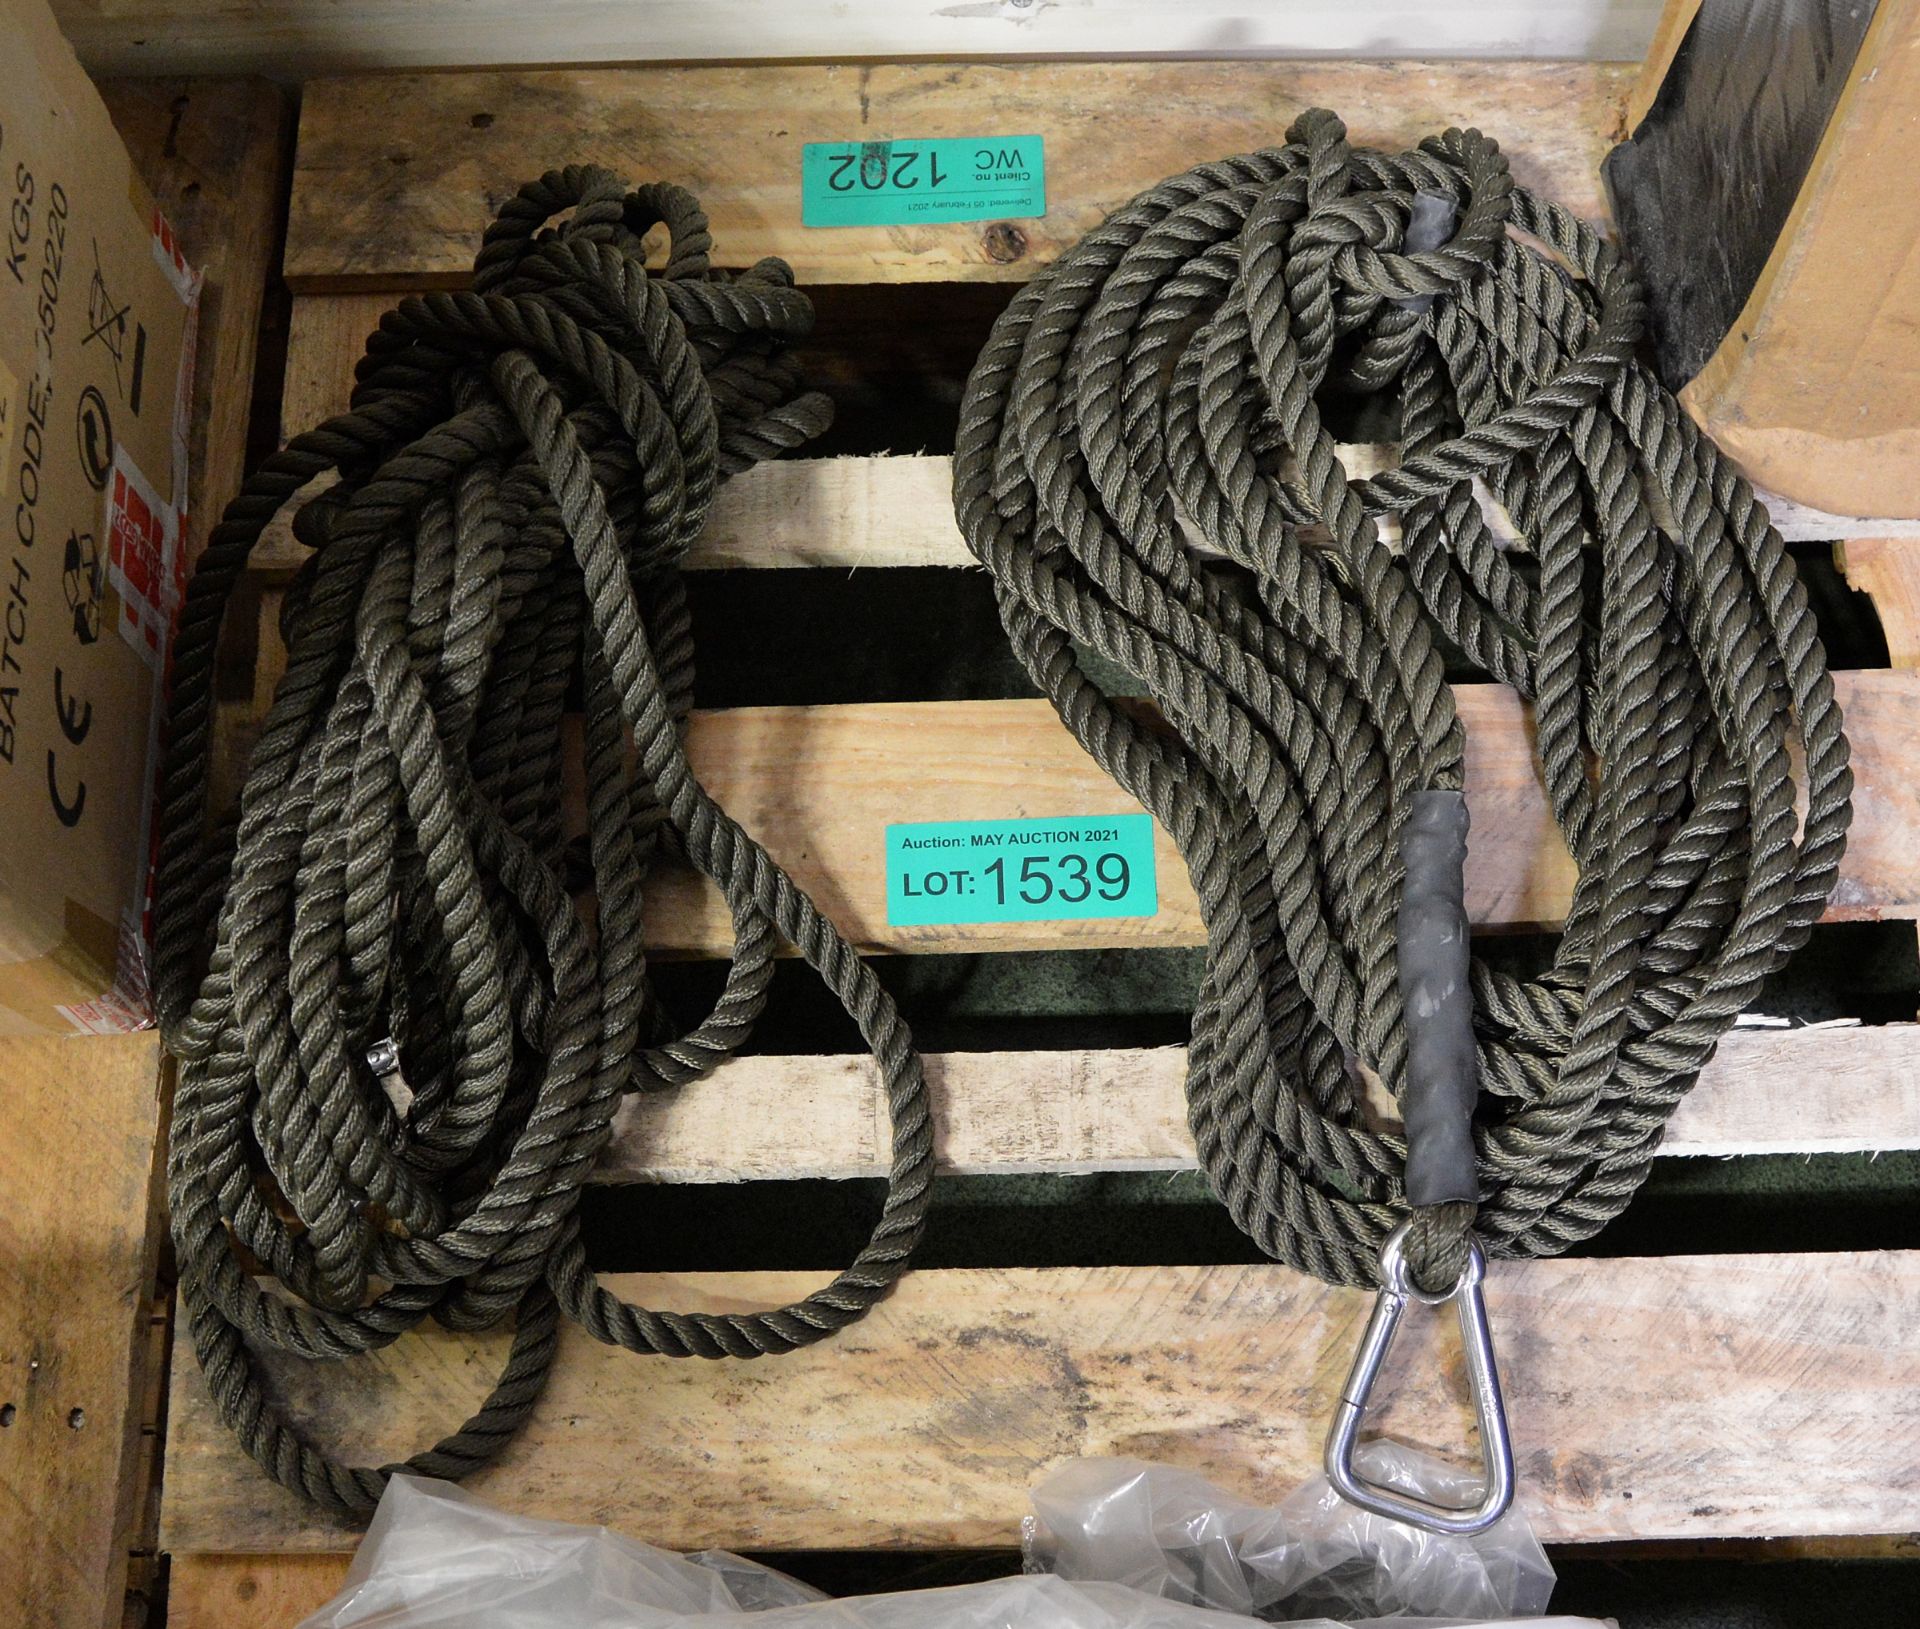 2x Rope lengths - unknown length - Image 2 of 2